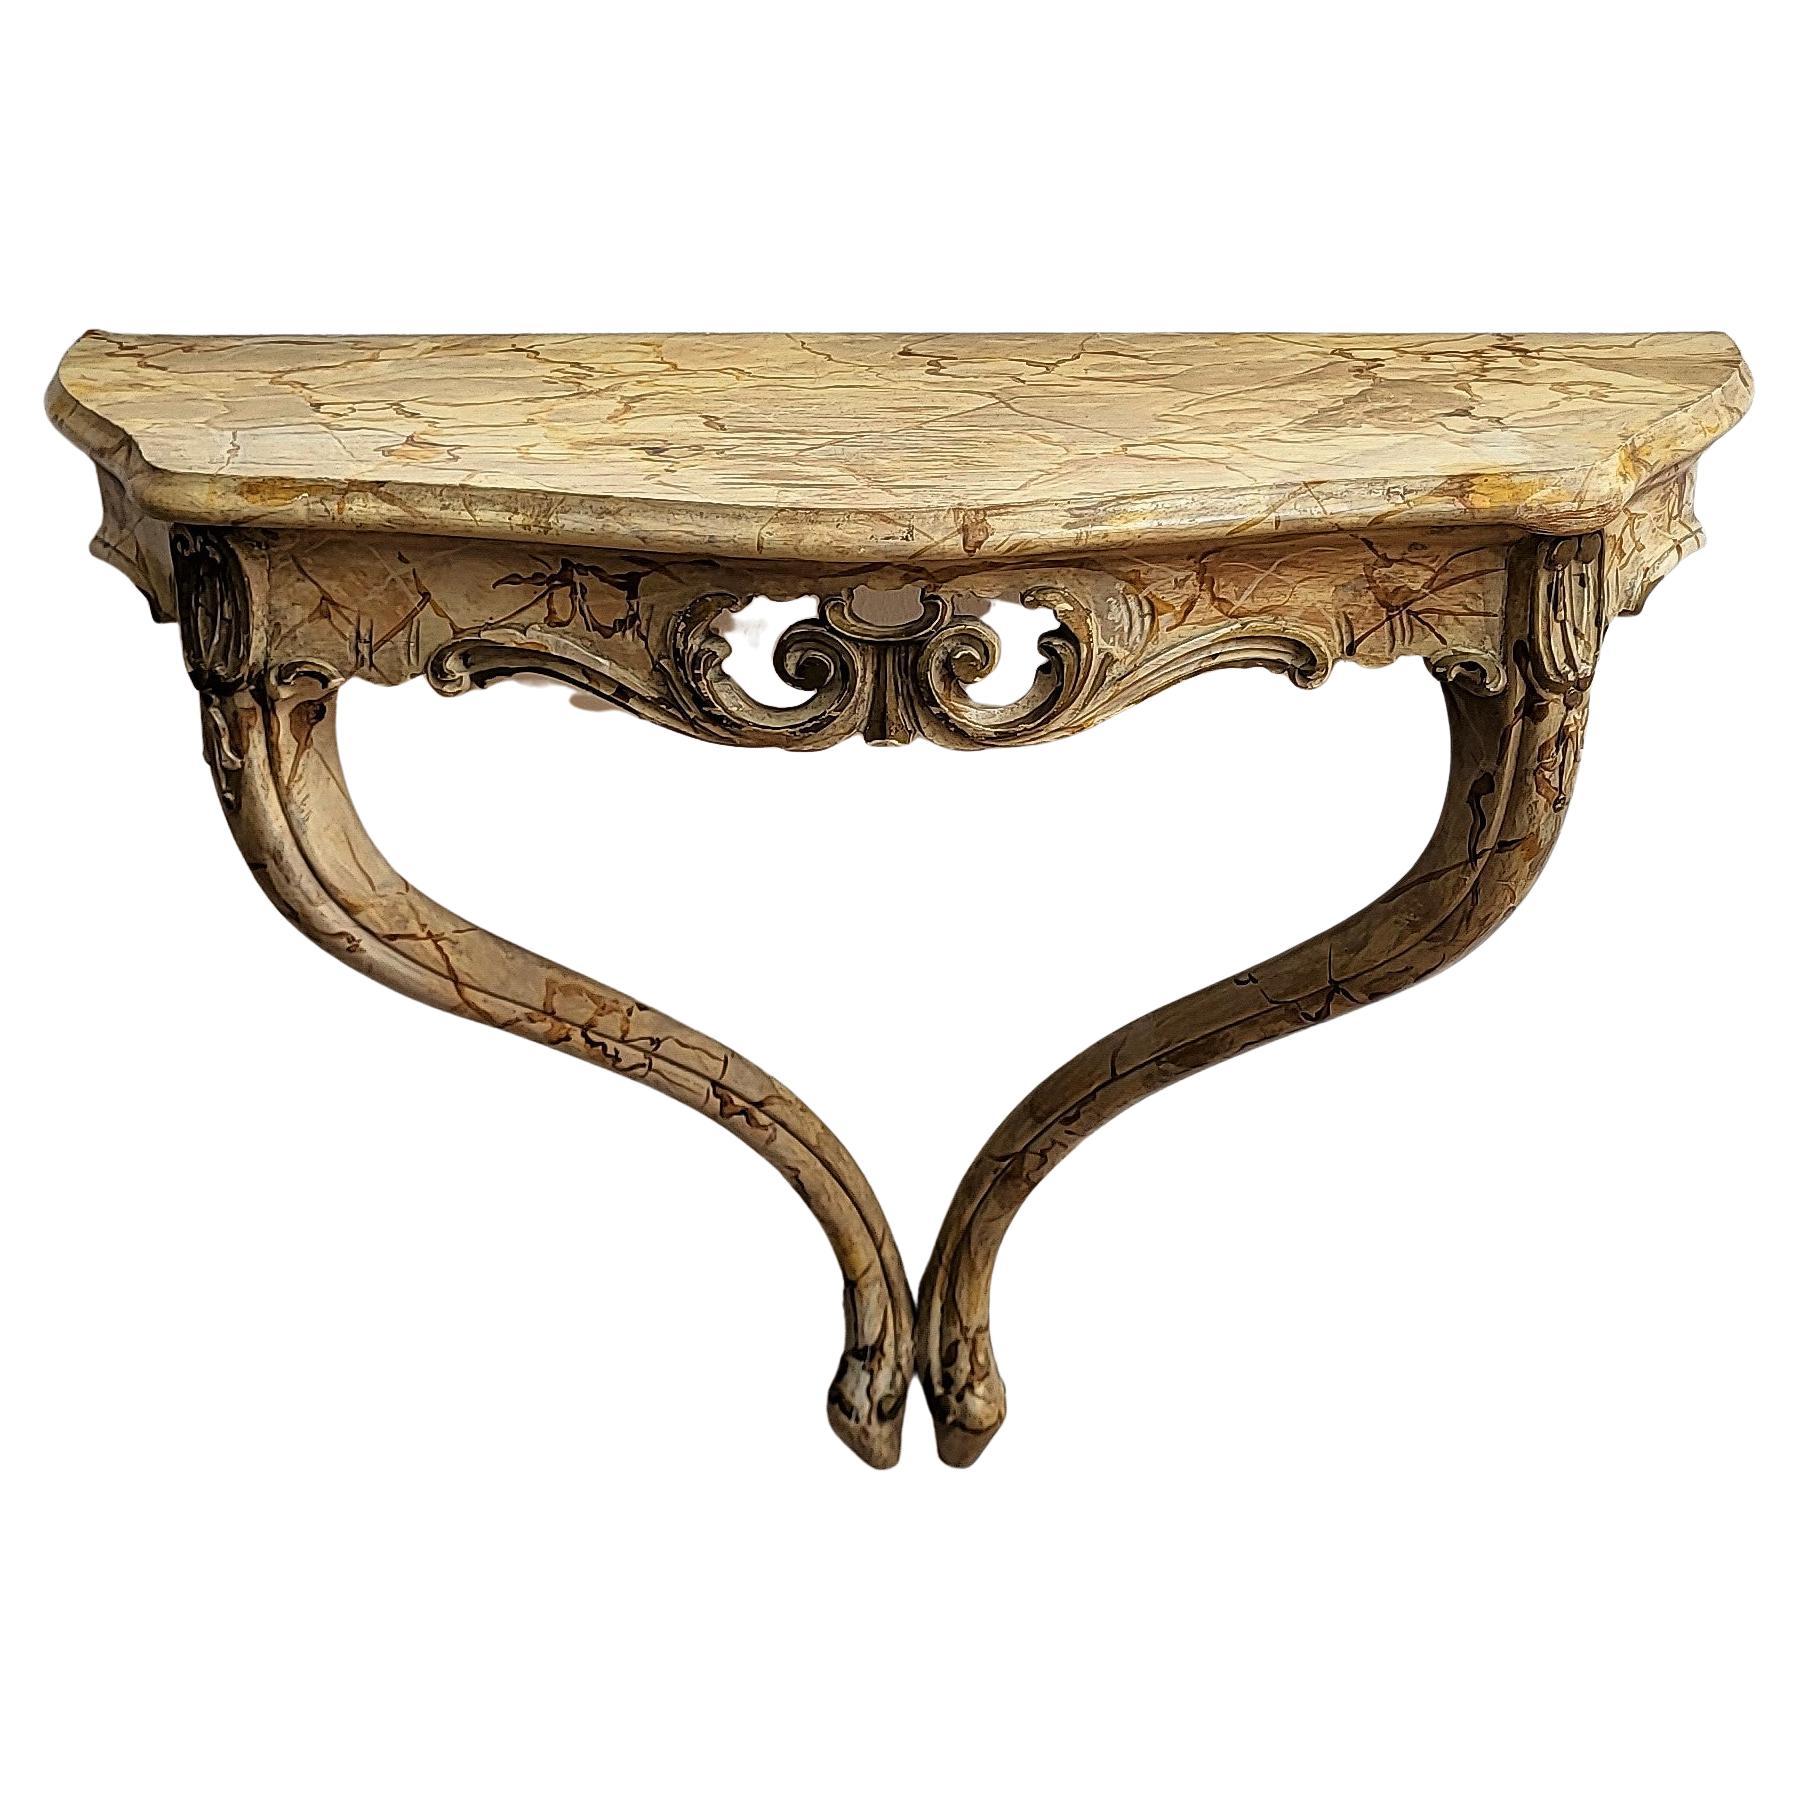 Italian Baroque Wooden Carved Painted Wall Mounted Console Table Shelf